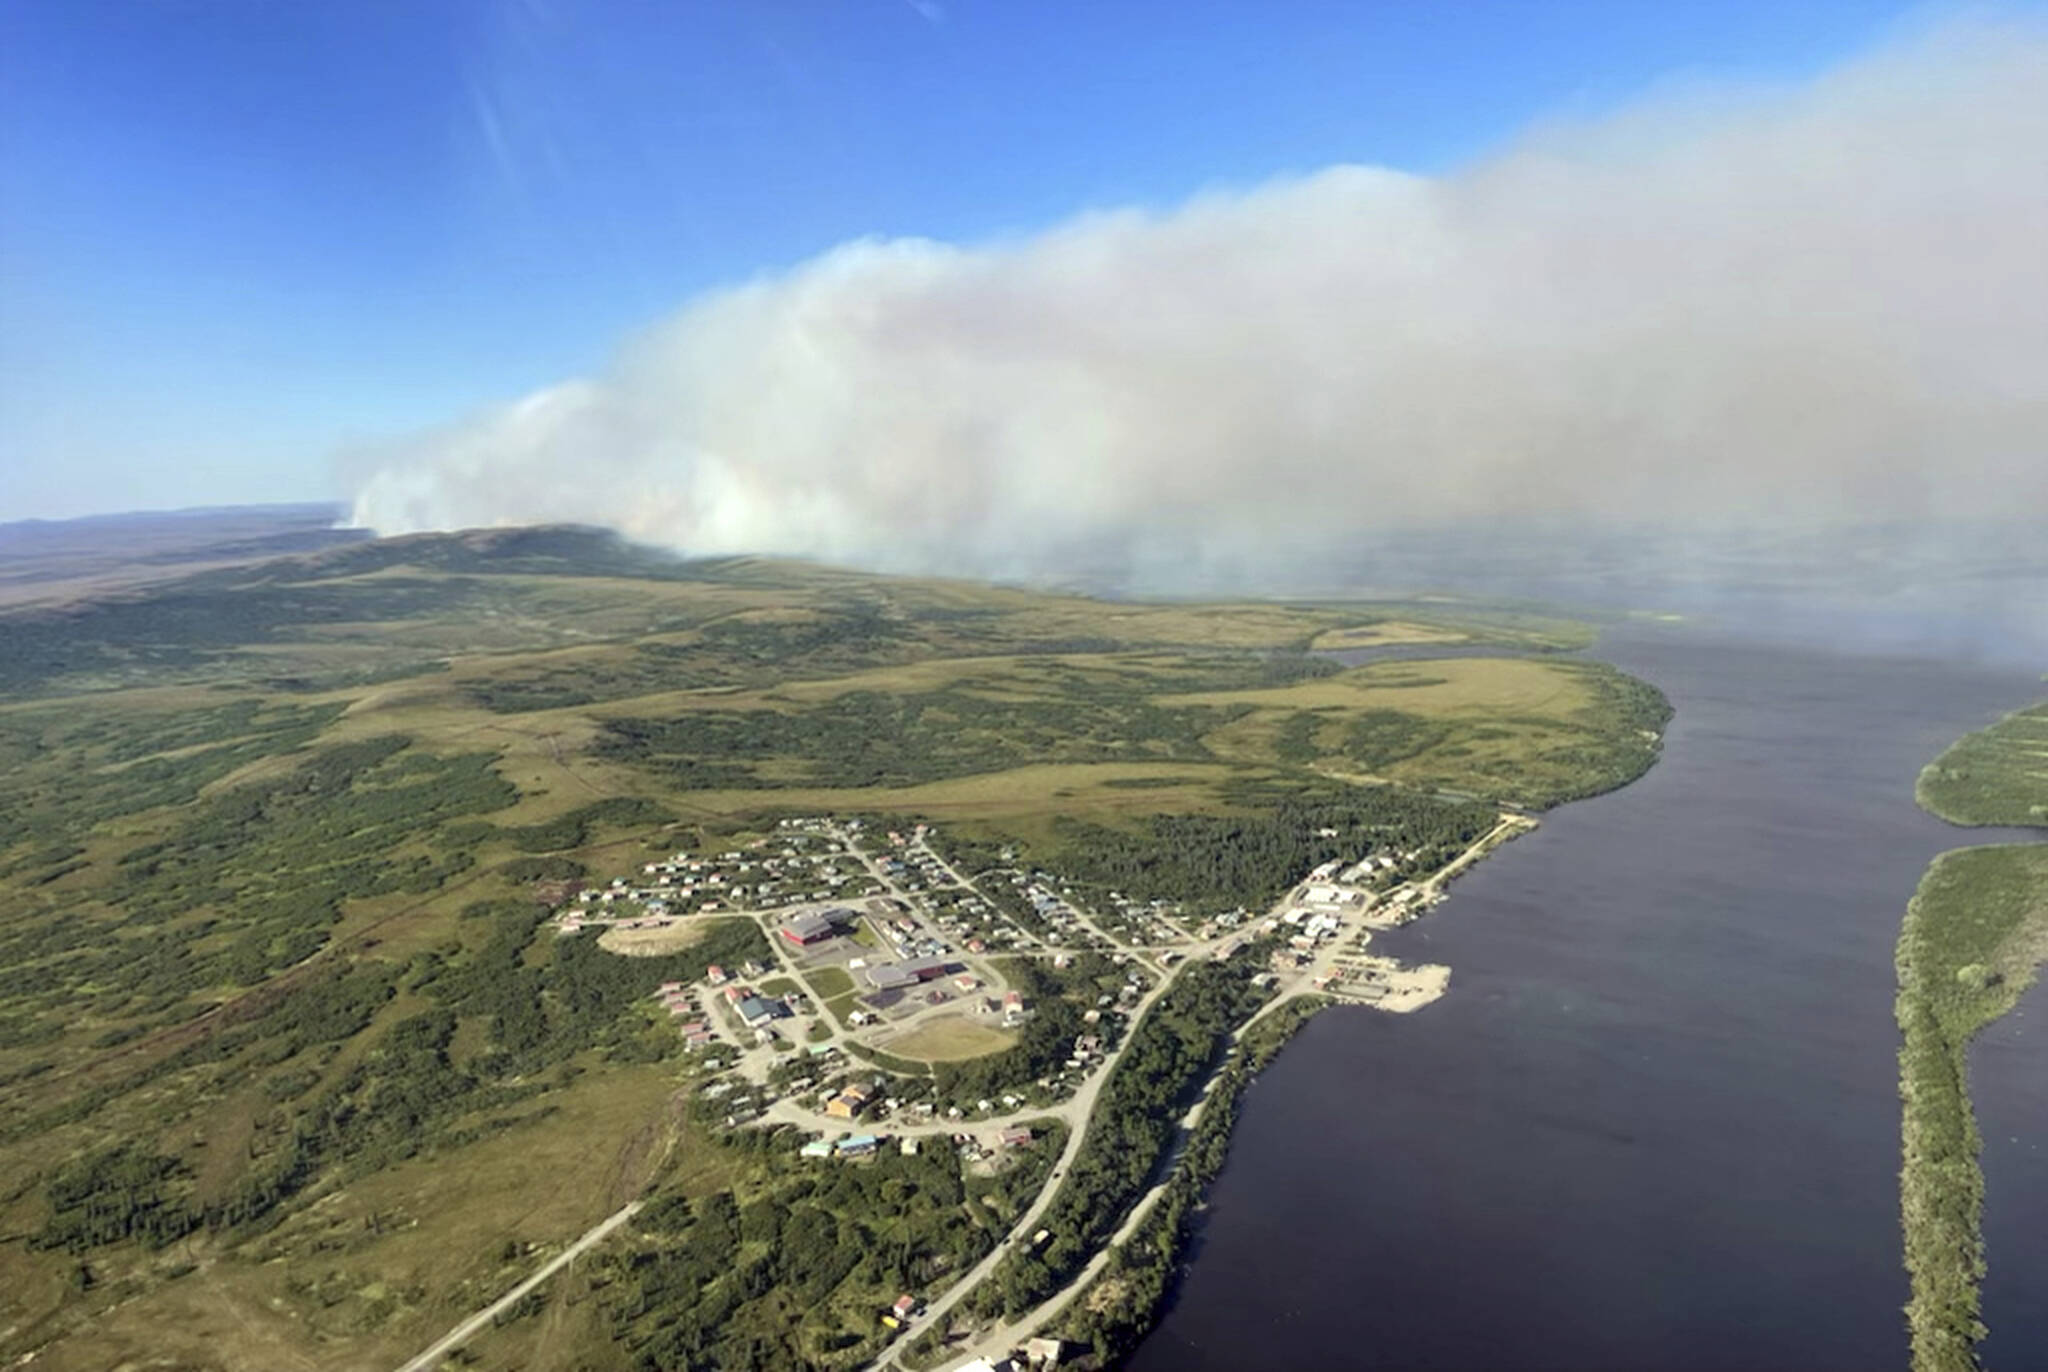 This aerial photo provided by the Bureau of Land Management Alaska Fire Service shows a tundra fire burning near the community of St. Mary’s, Alaska, on June 10, 2022. Alaska’s remarkable wildfire season includes over 530 blazes that have burned an area more than three times the size of Rhode Island, with nearly all the impacts, including dangerous breathing conditions from smoke, attributed to fires started by lightning. (Ryan McPherson / Bureau of Land Management Alaska Fire Service)